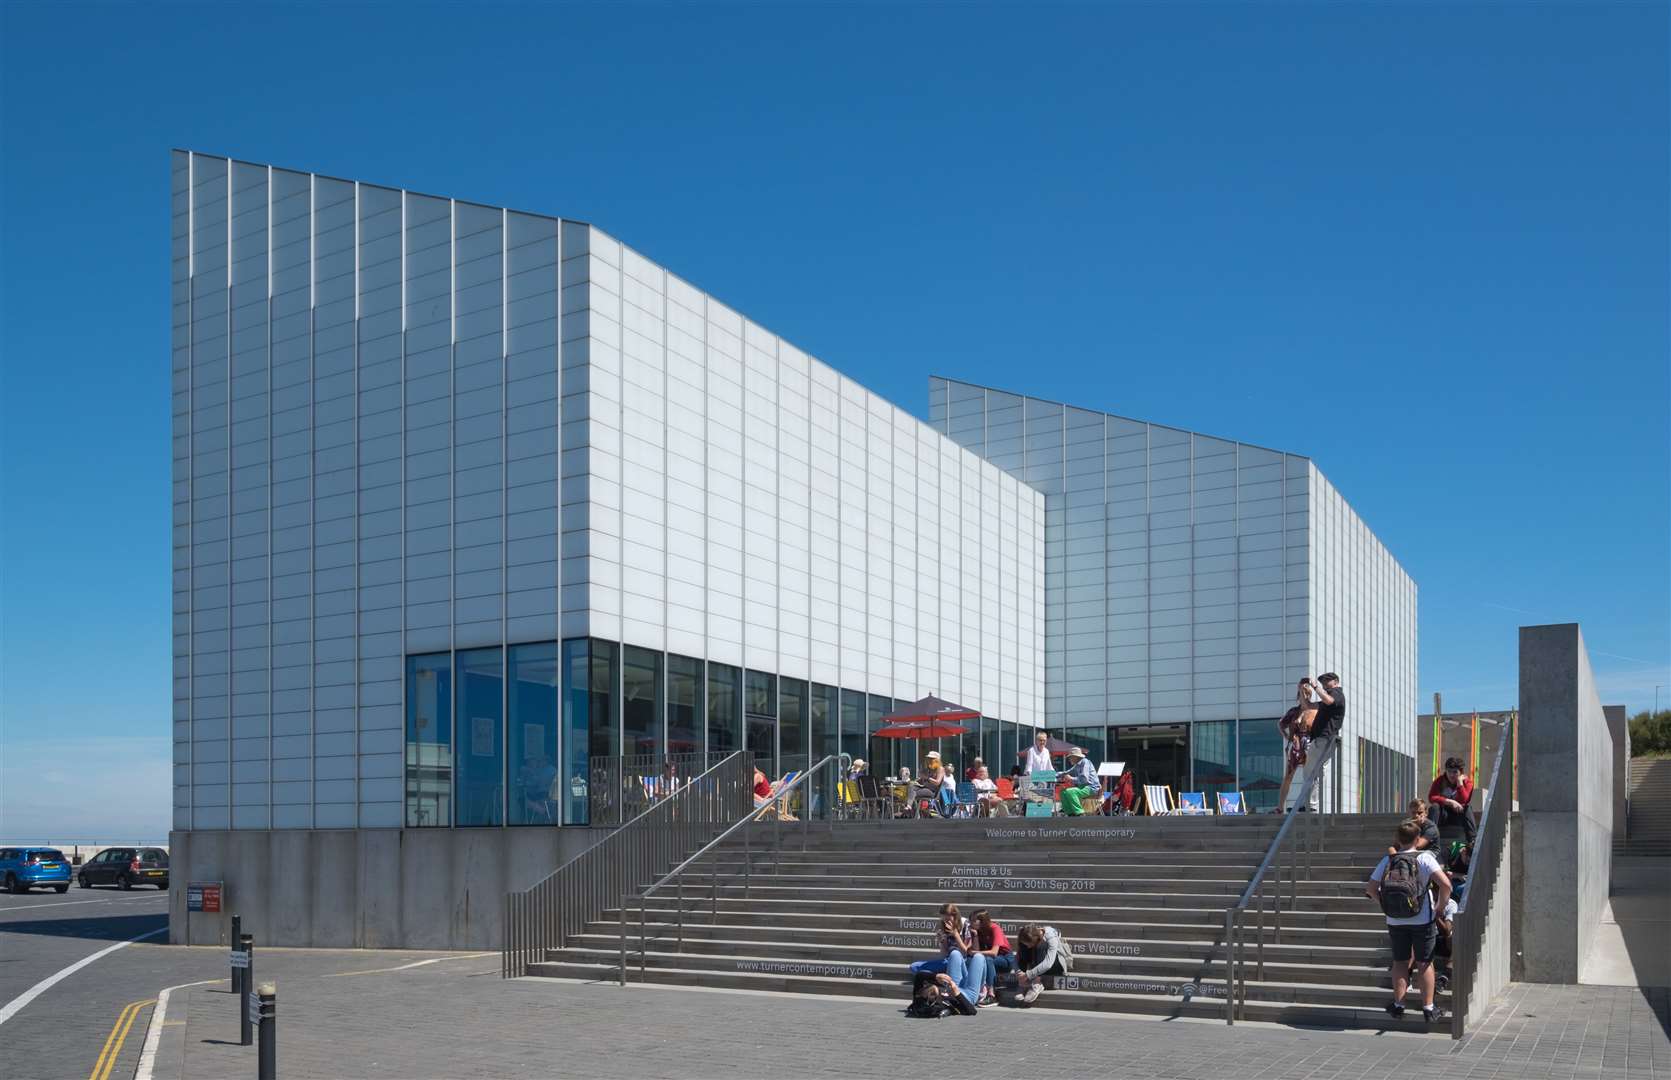 The Turner Contemporary will close for five months